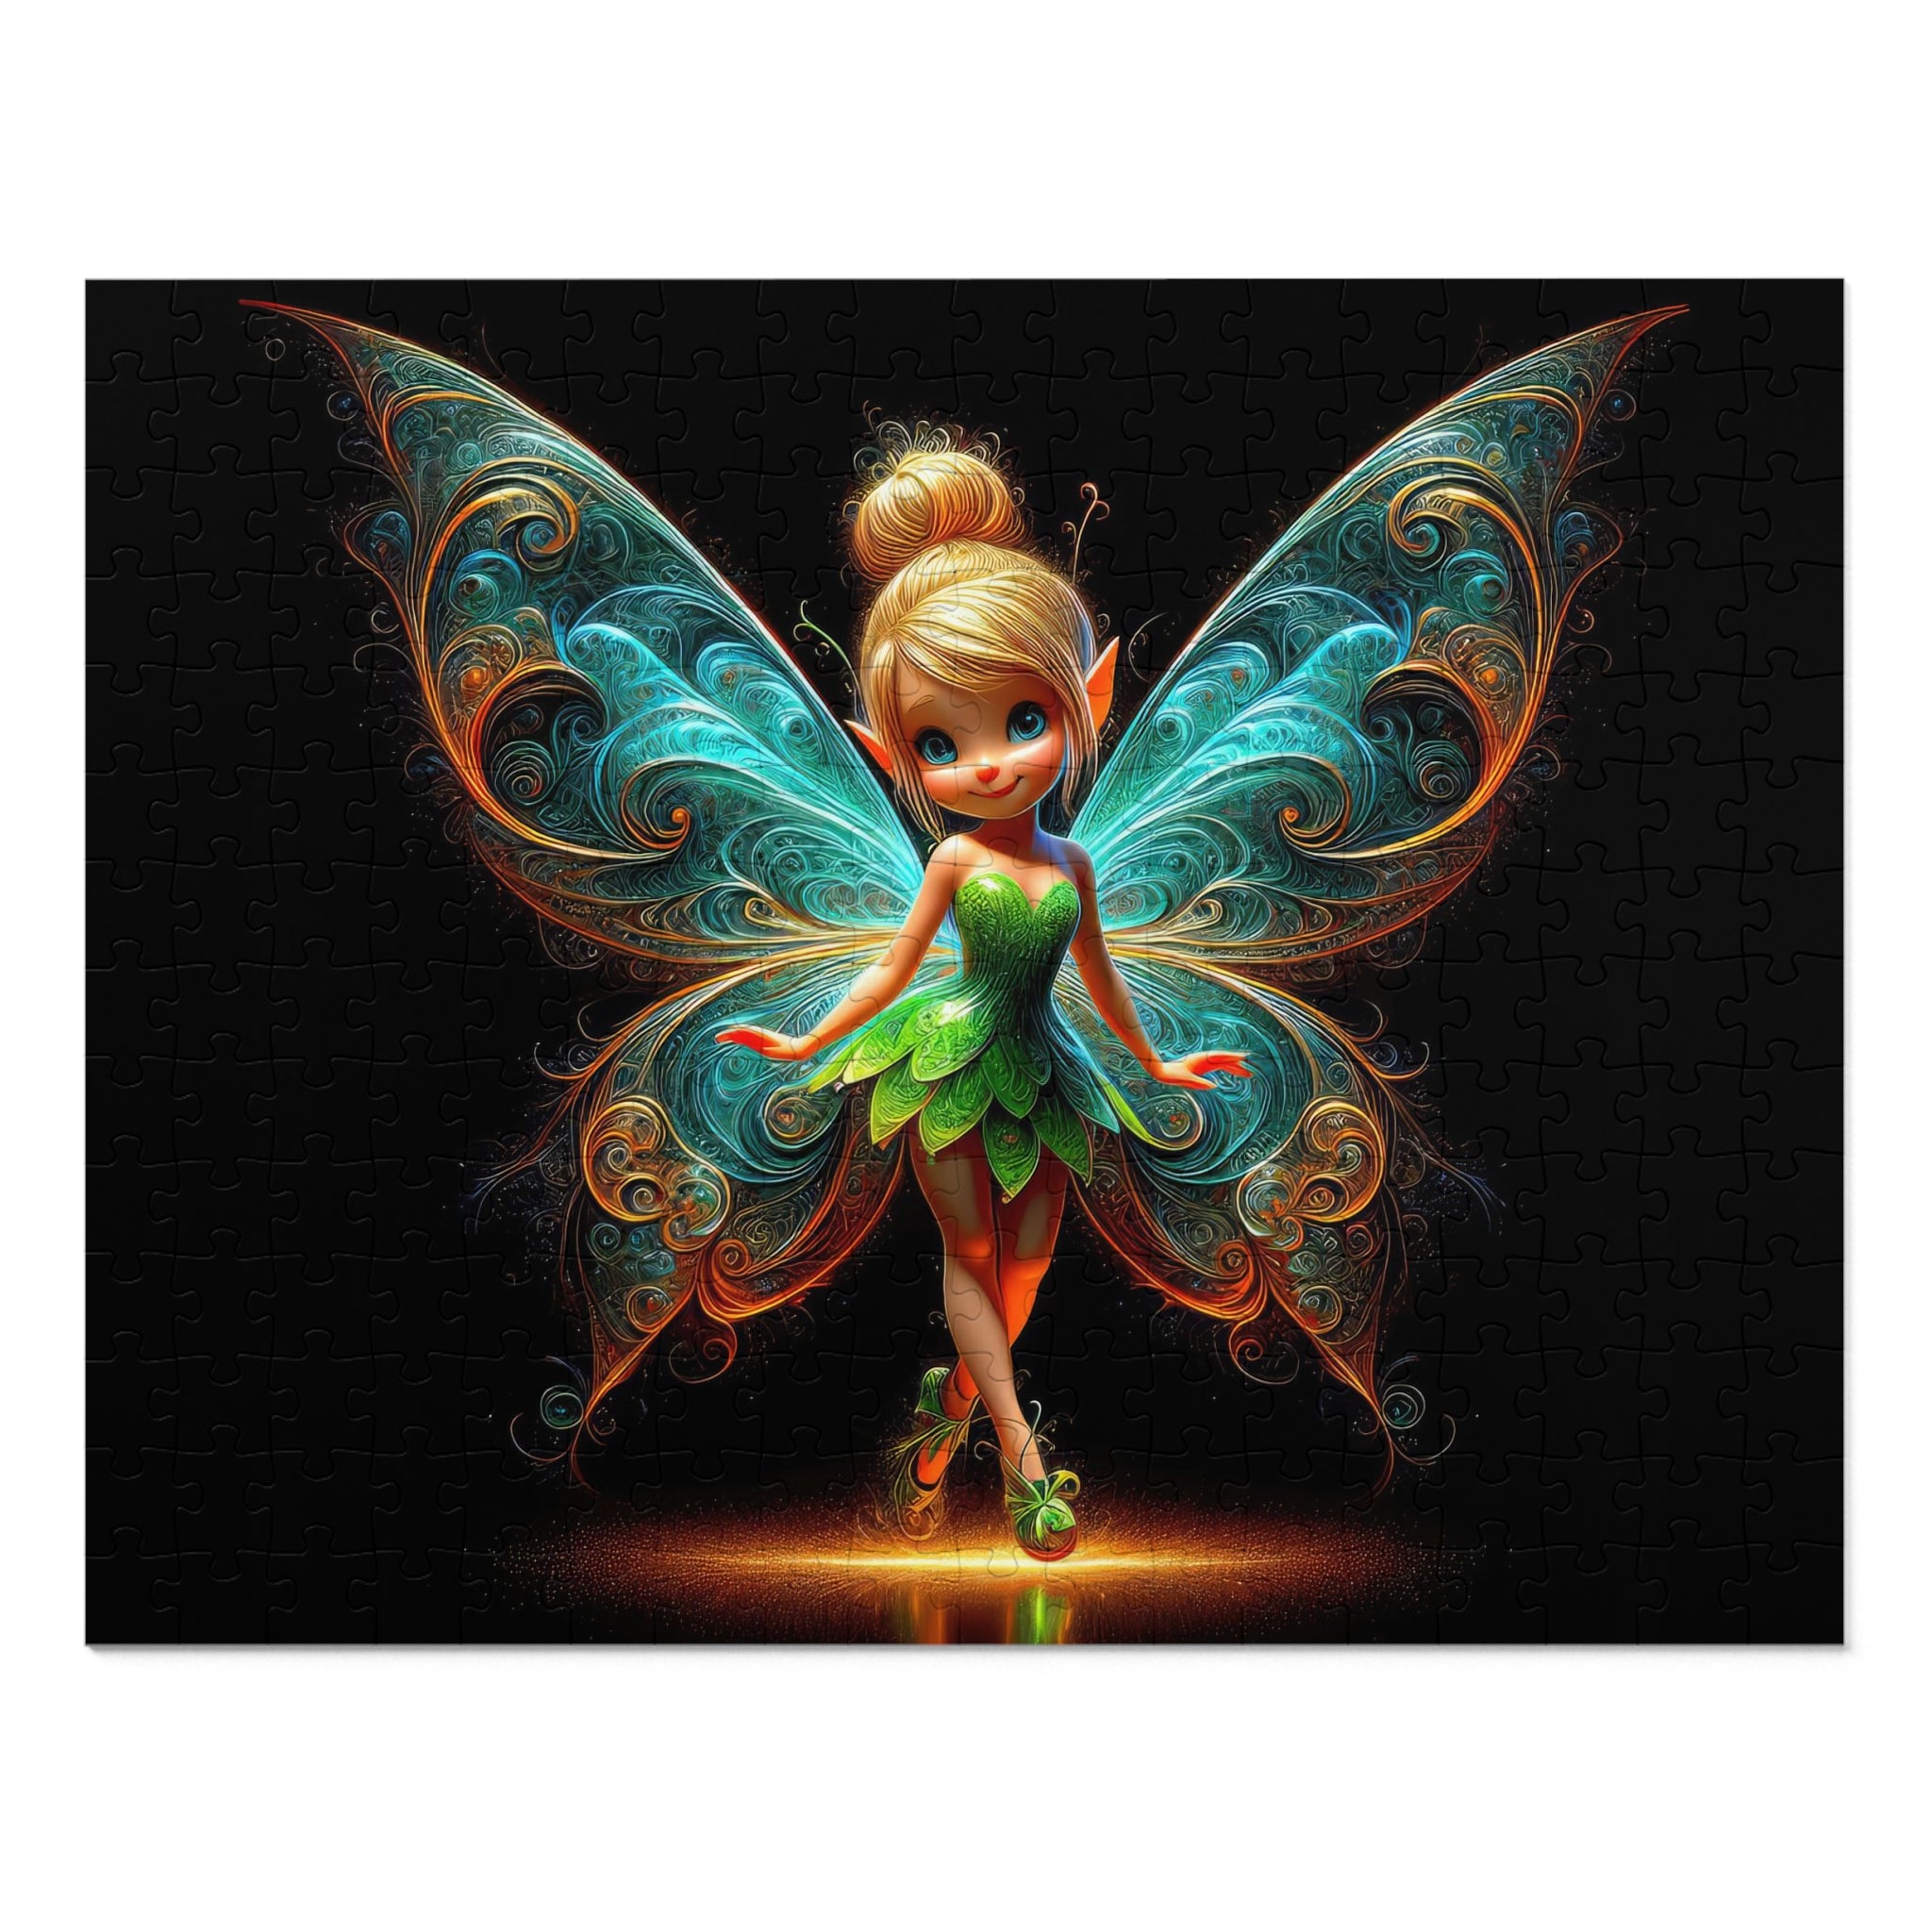 Glow of the Enchanted Eve Jigsaw Puzzle